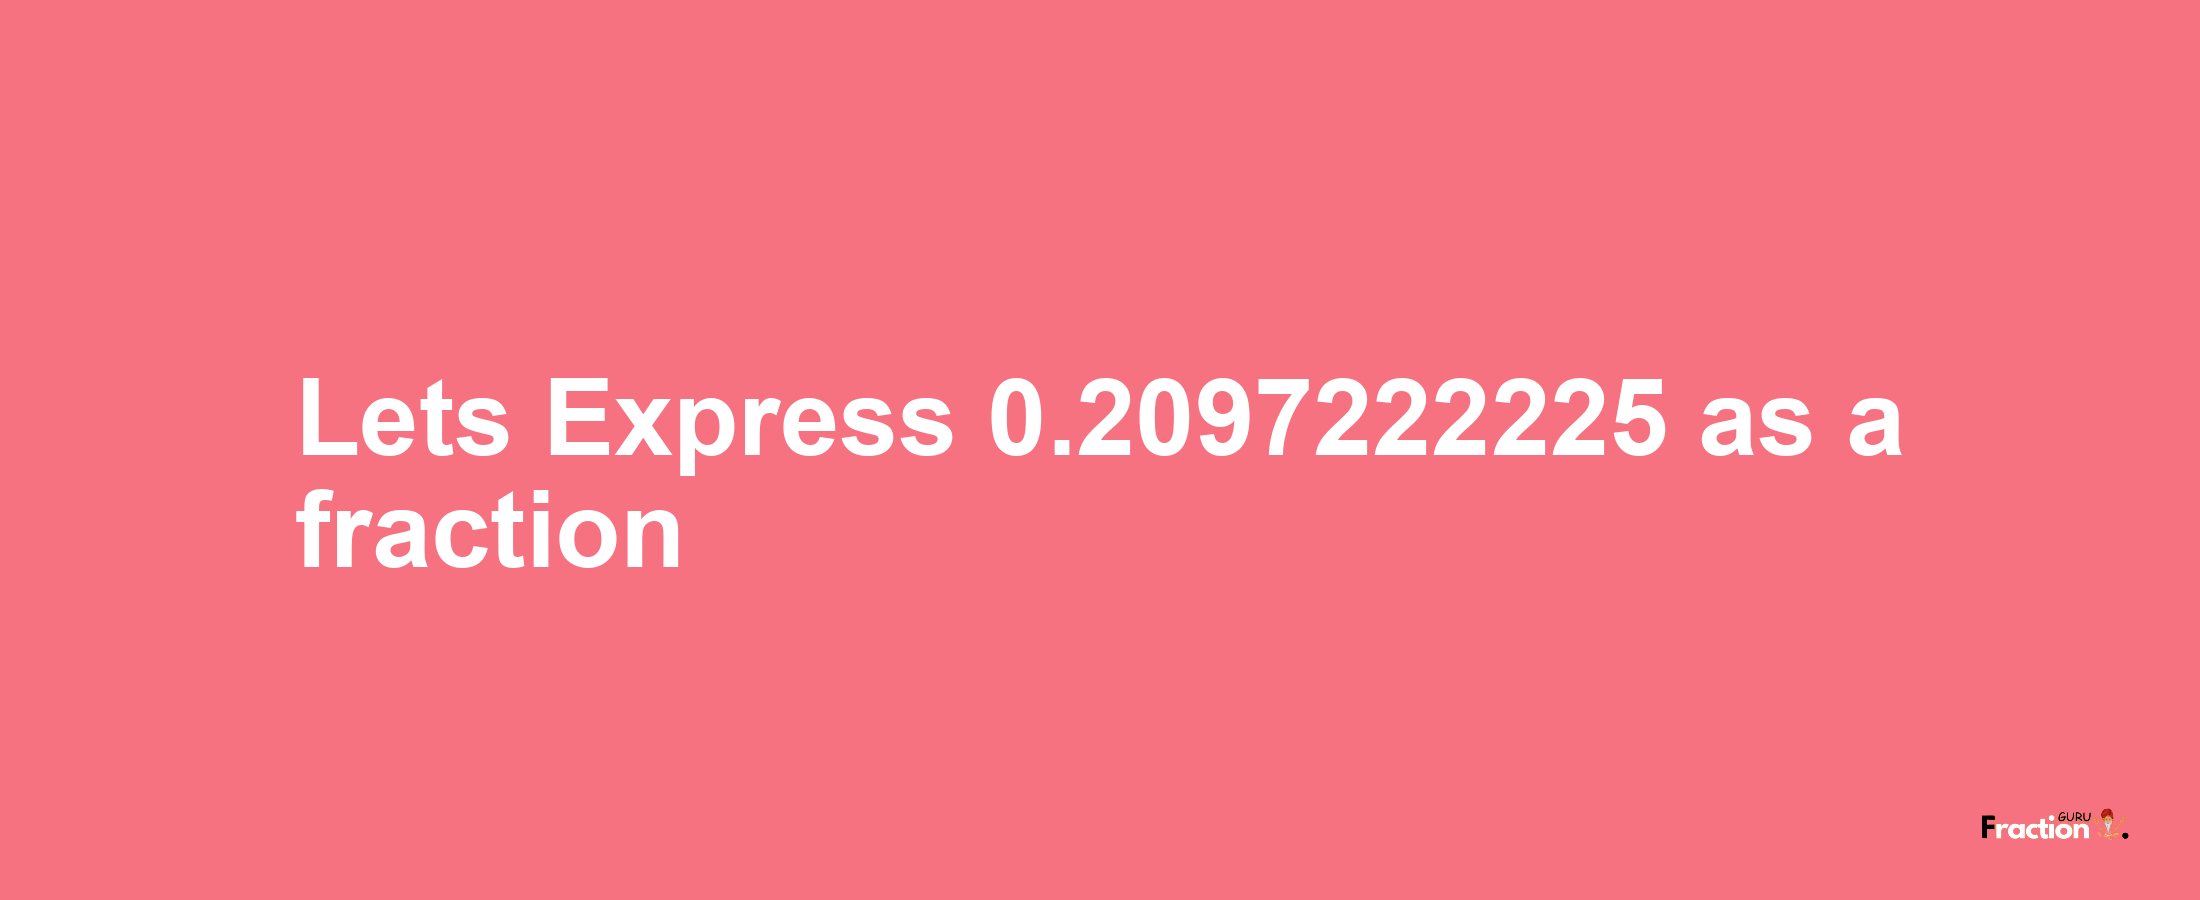 Lets Express 0.2097222225 as afraction